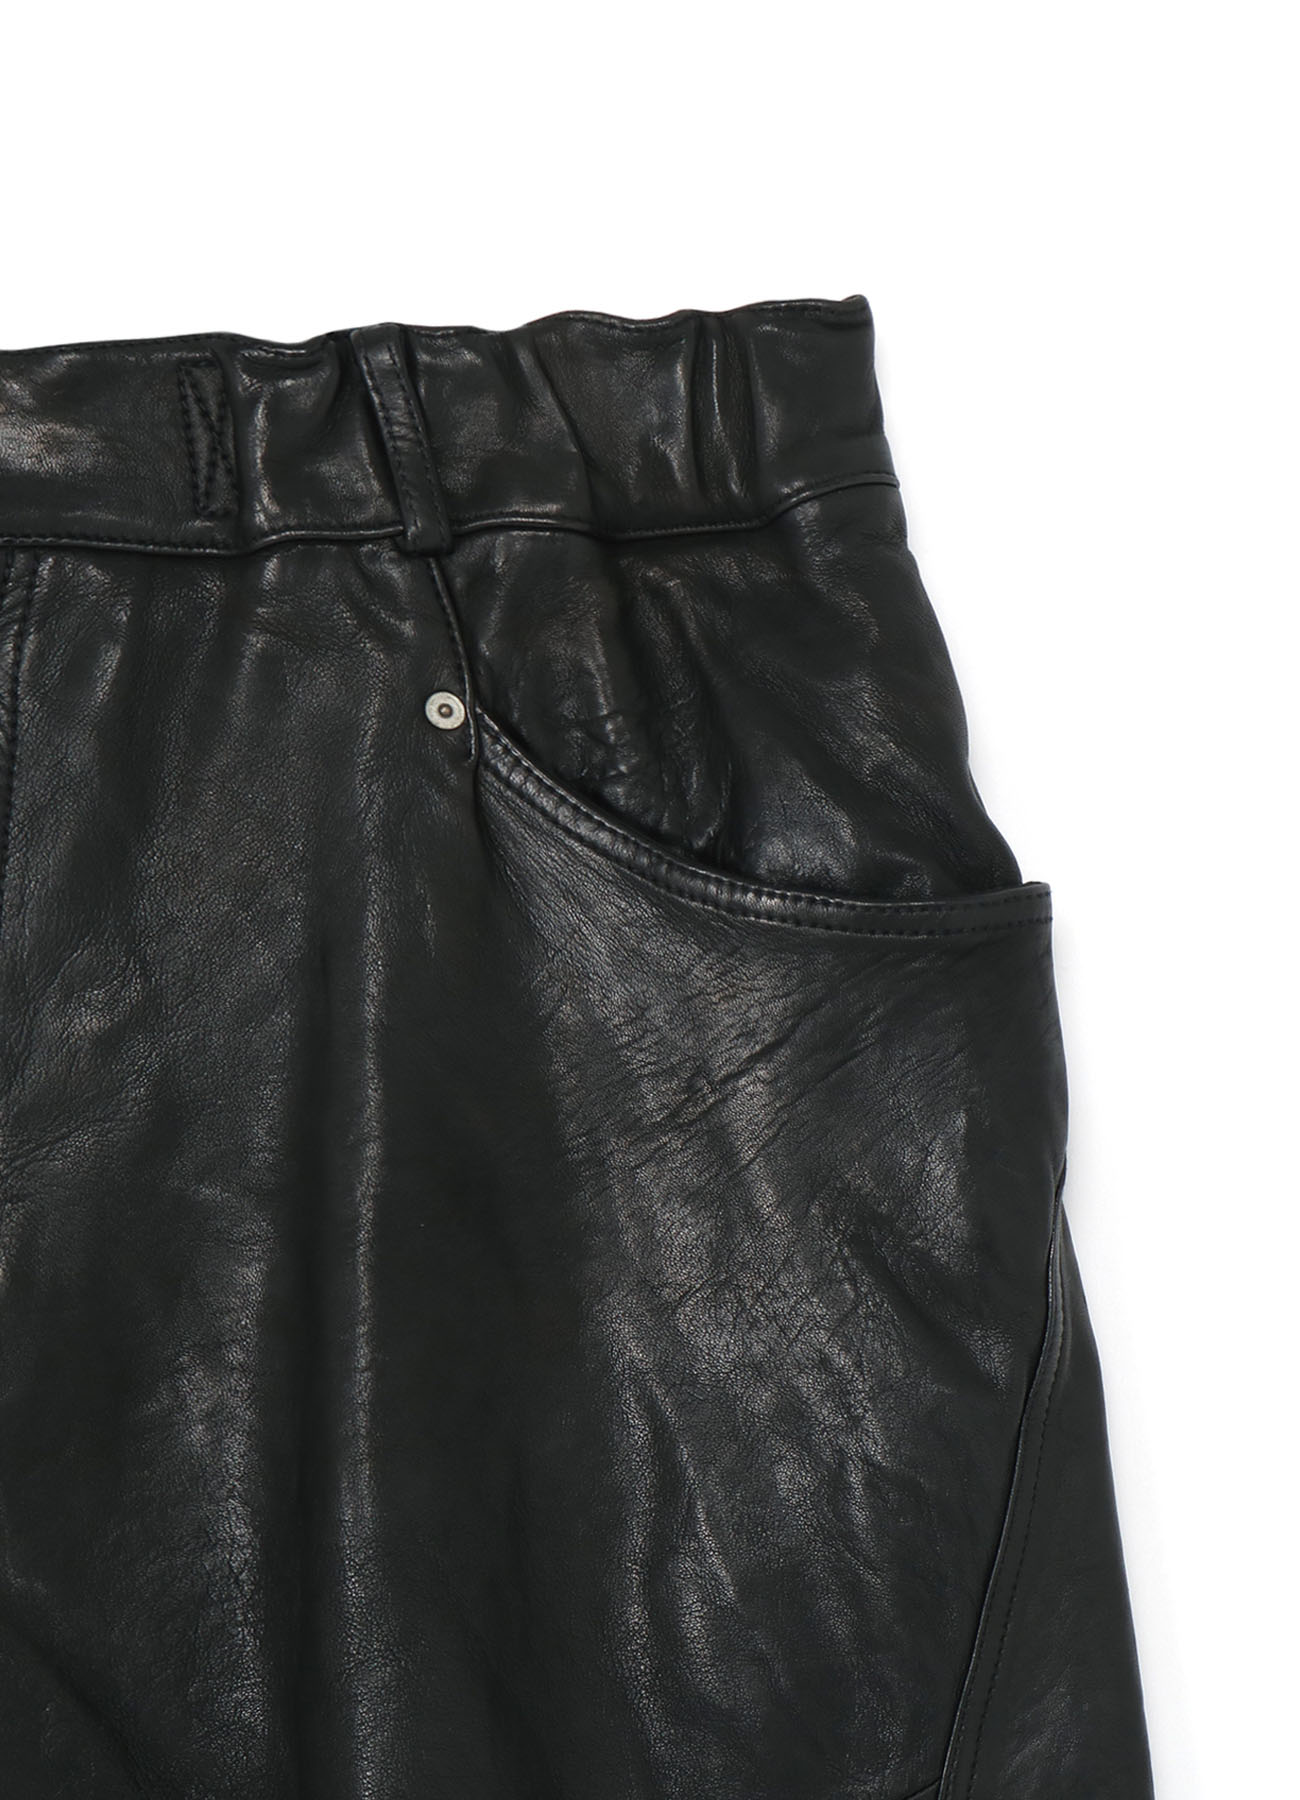 Vegetable Tanned and Washed Sheep Leather Slim Sarouel Pants